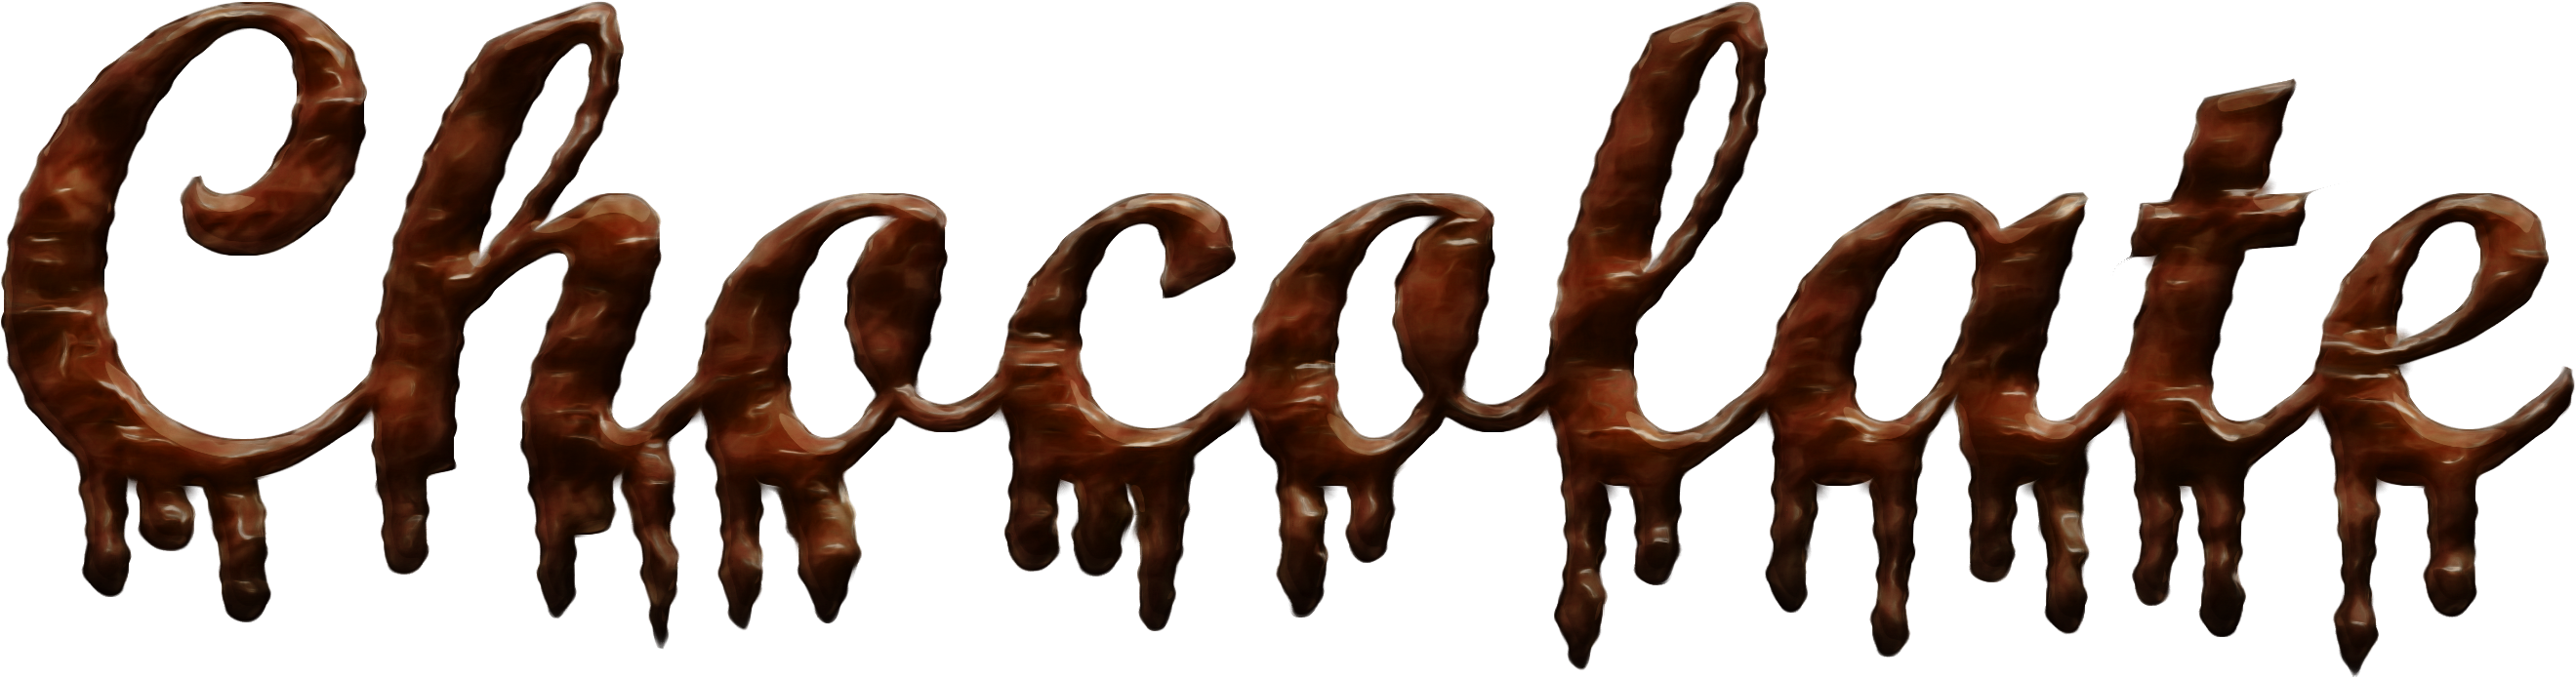 Image - Chocolate Spelled In Chocolate (2937x780), Png Download